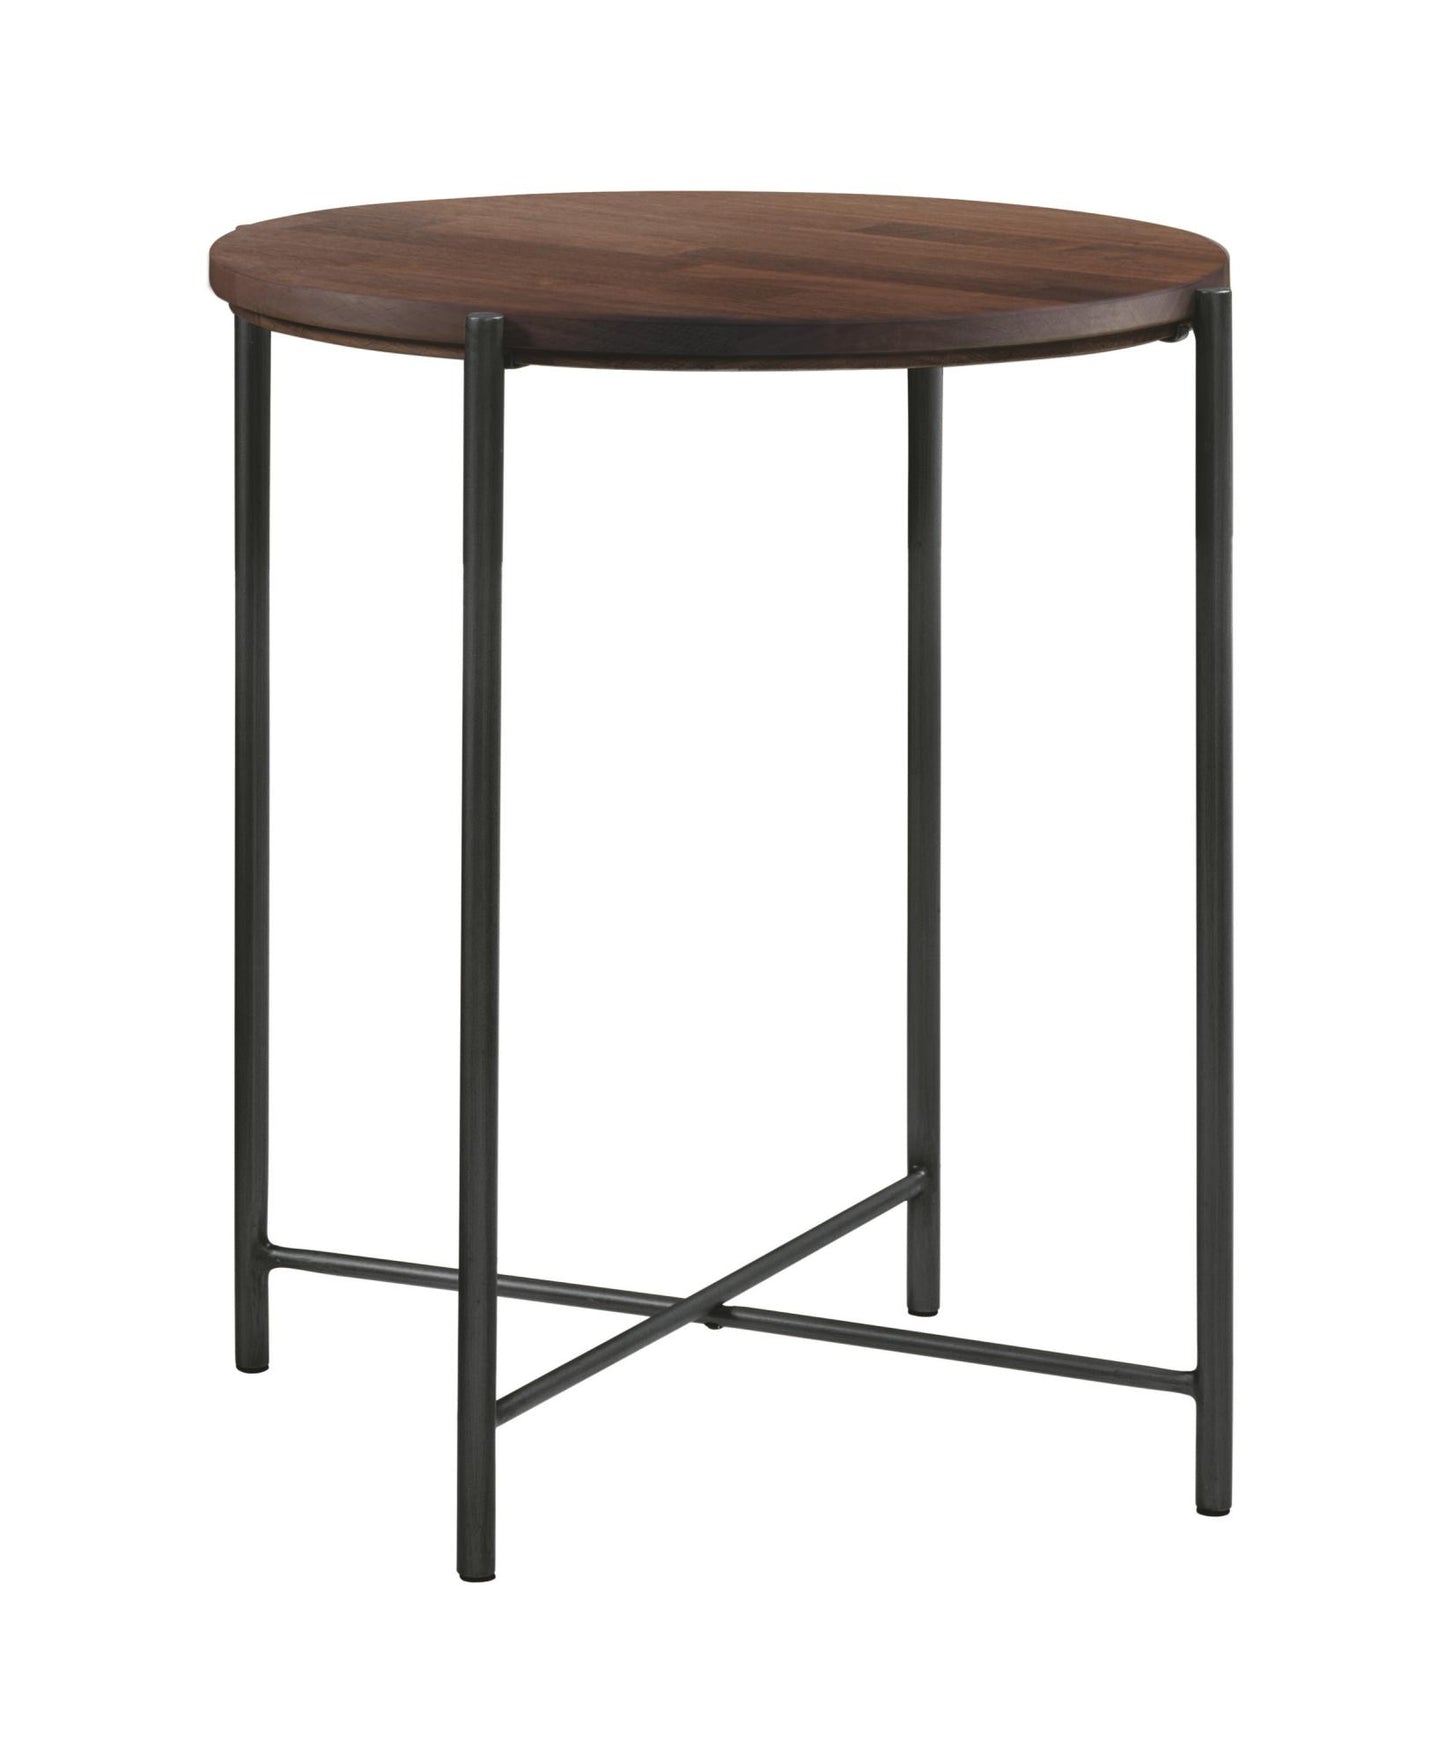 Nali Bedside Table Different Steel And Wood Types